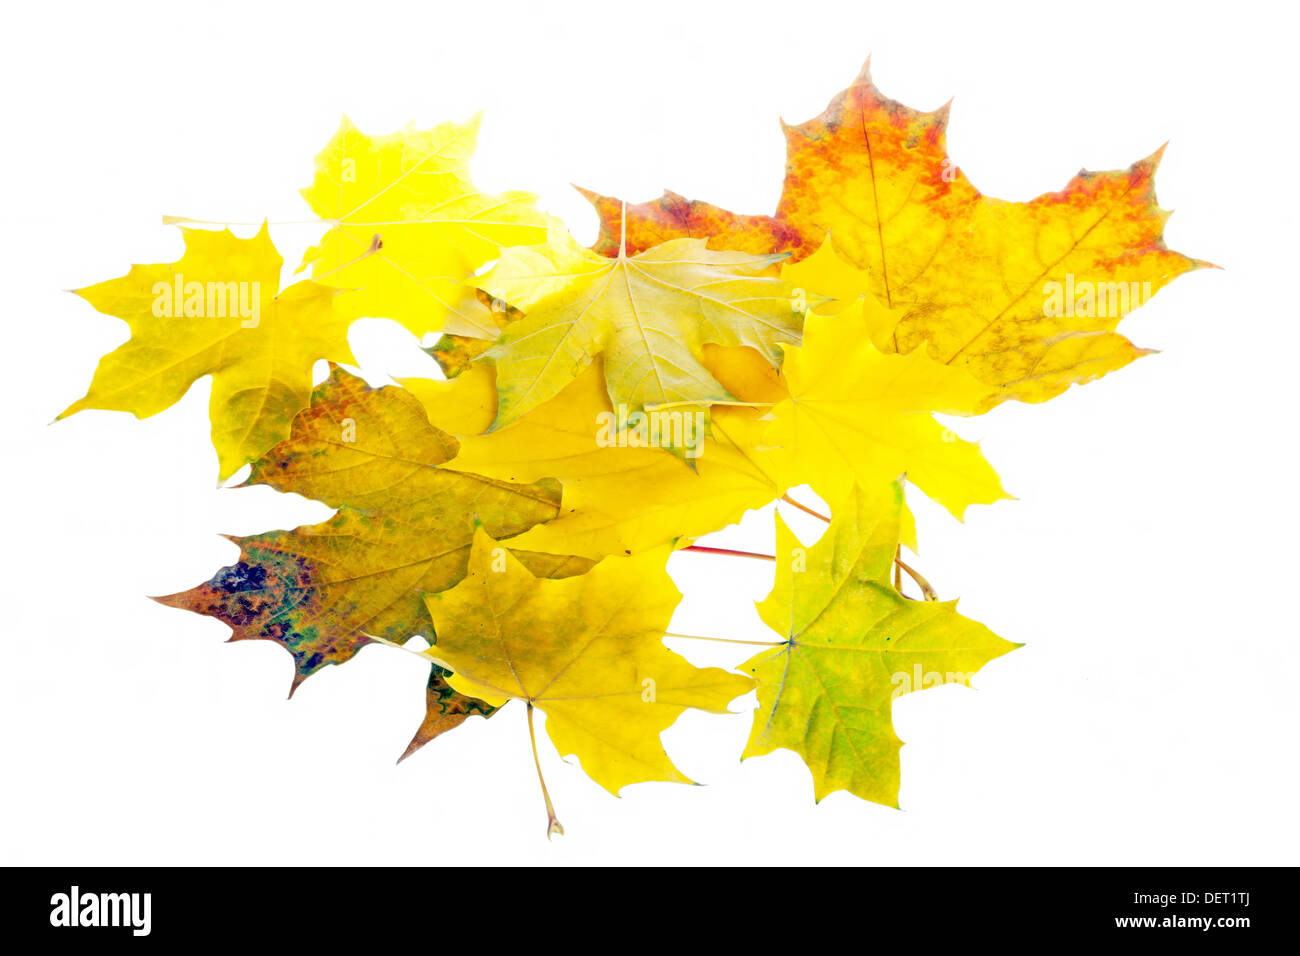 Heap of autumn leaves isolated on white background Stock Photo